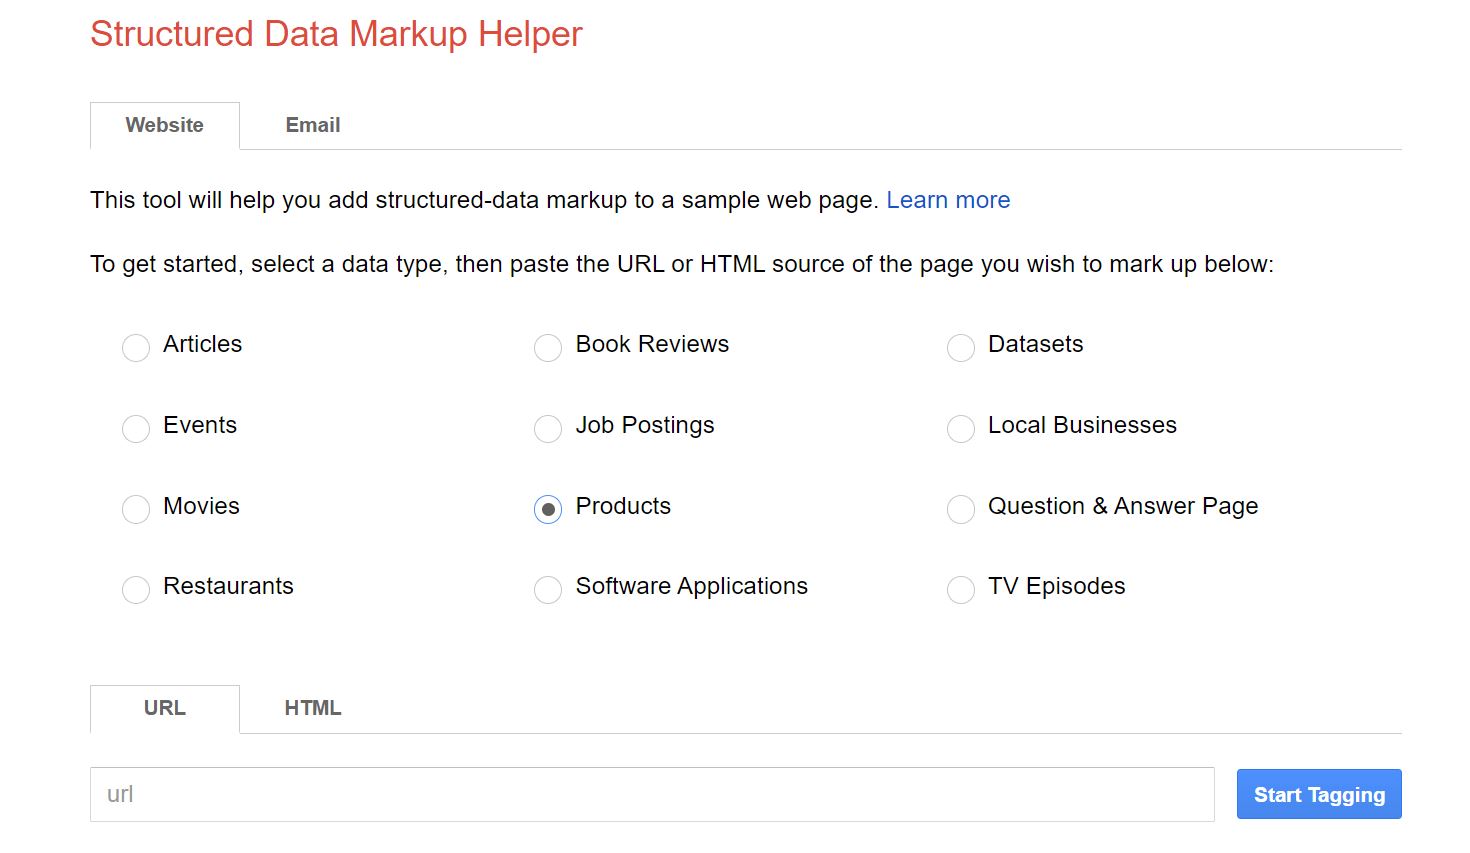 Choosing a data type in the Structured Data Markup Helper